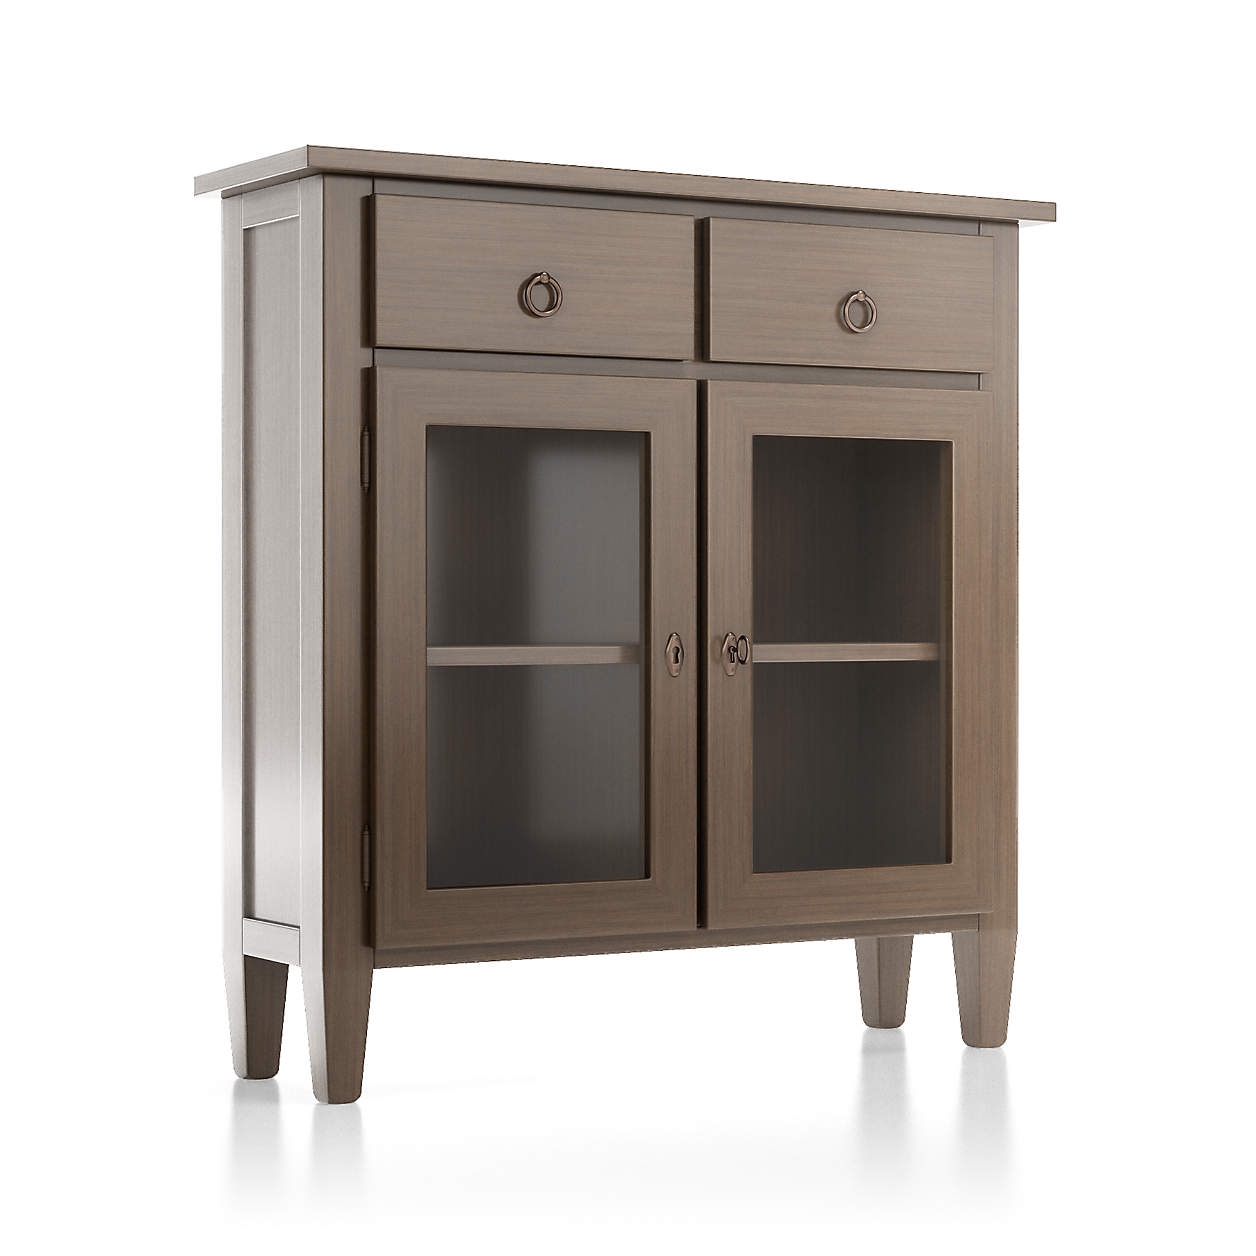 Stretto Pinot Lancaster Entryway Cabinet - Image 1